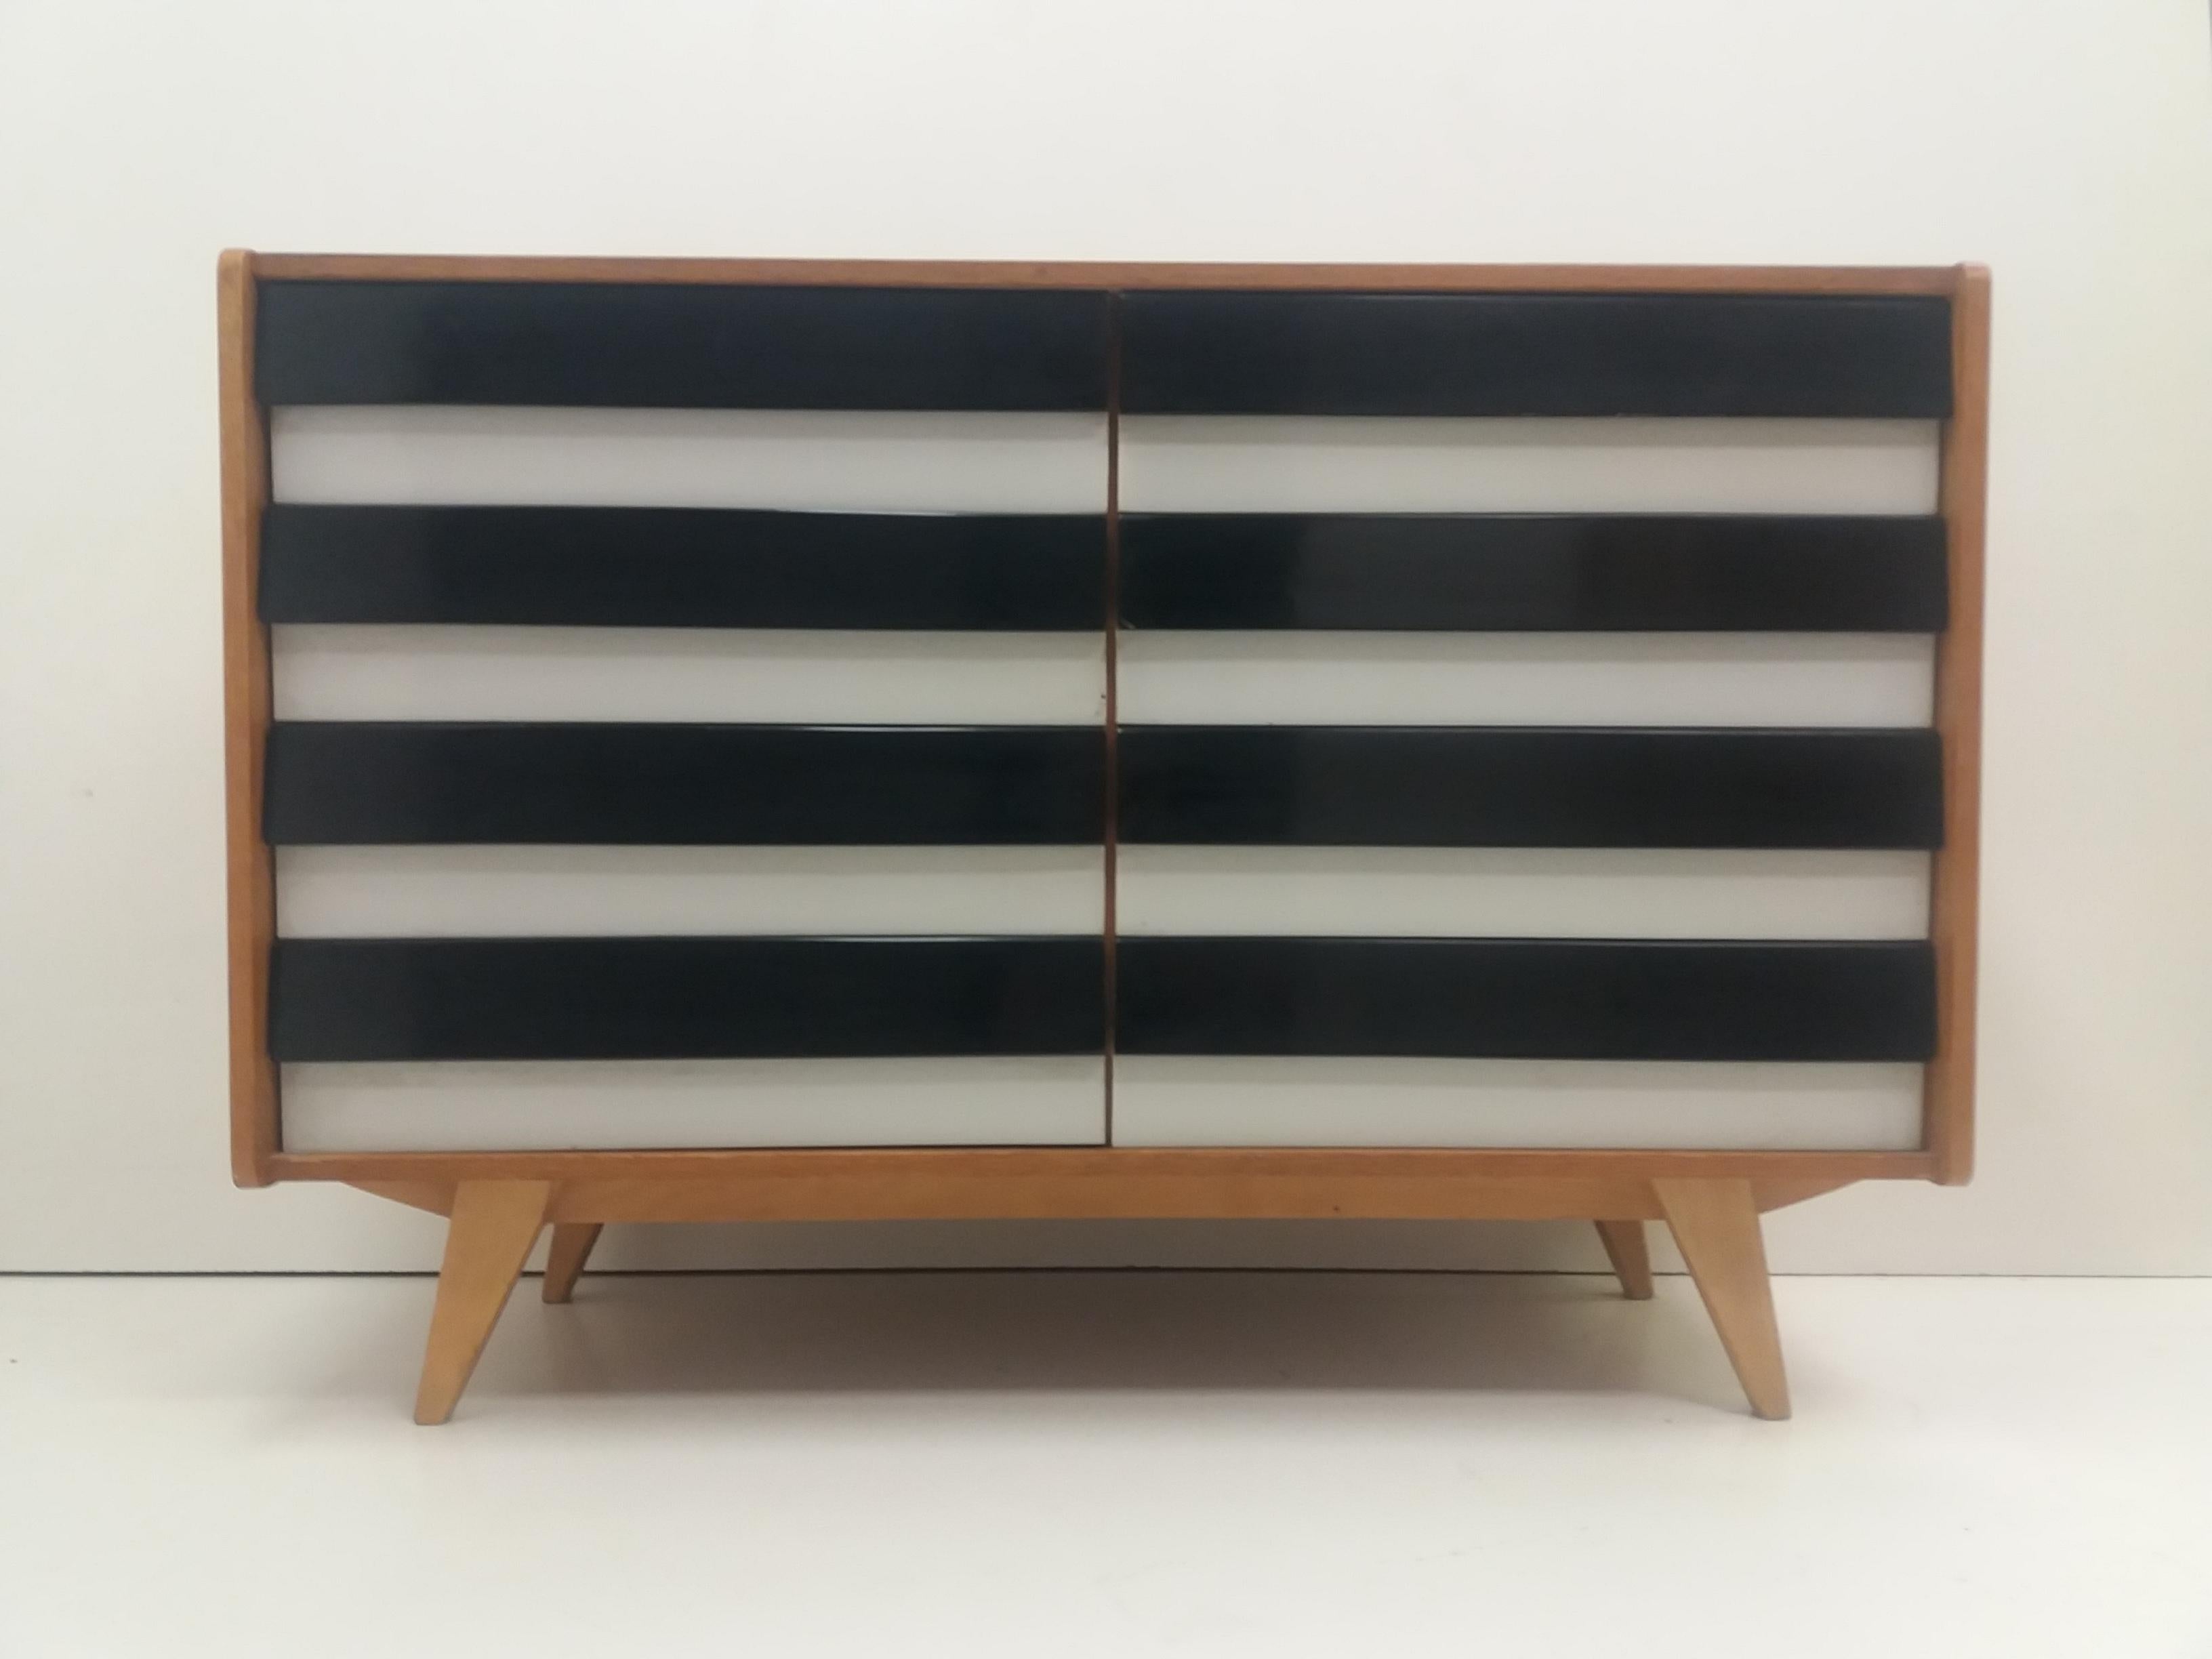 - Good original condition 
- Presented for the first time at Expo 58 in Brussels. 
- Wooden veneered construction - light beech veneer, drawers hardened plastic, drawer frames painted original.